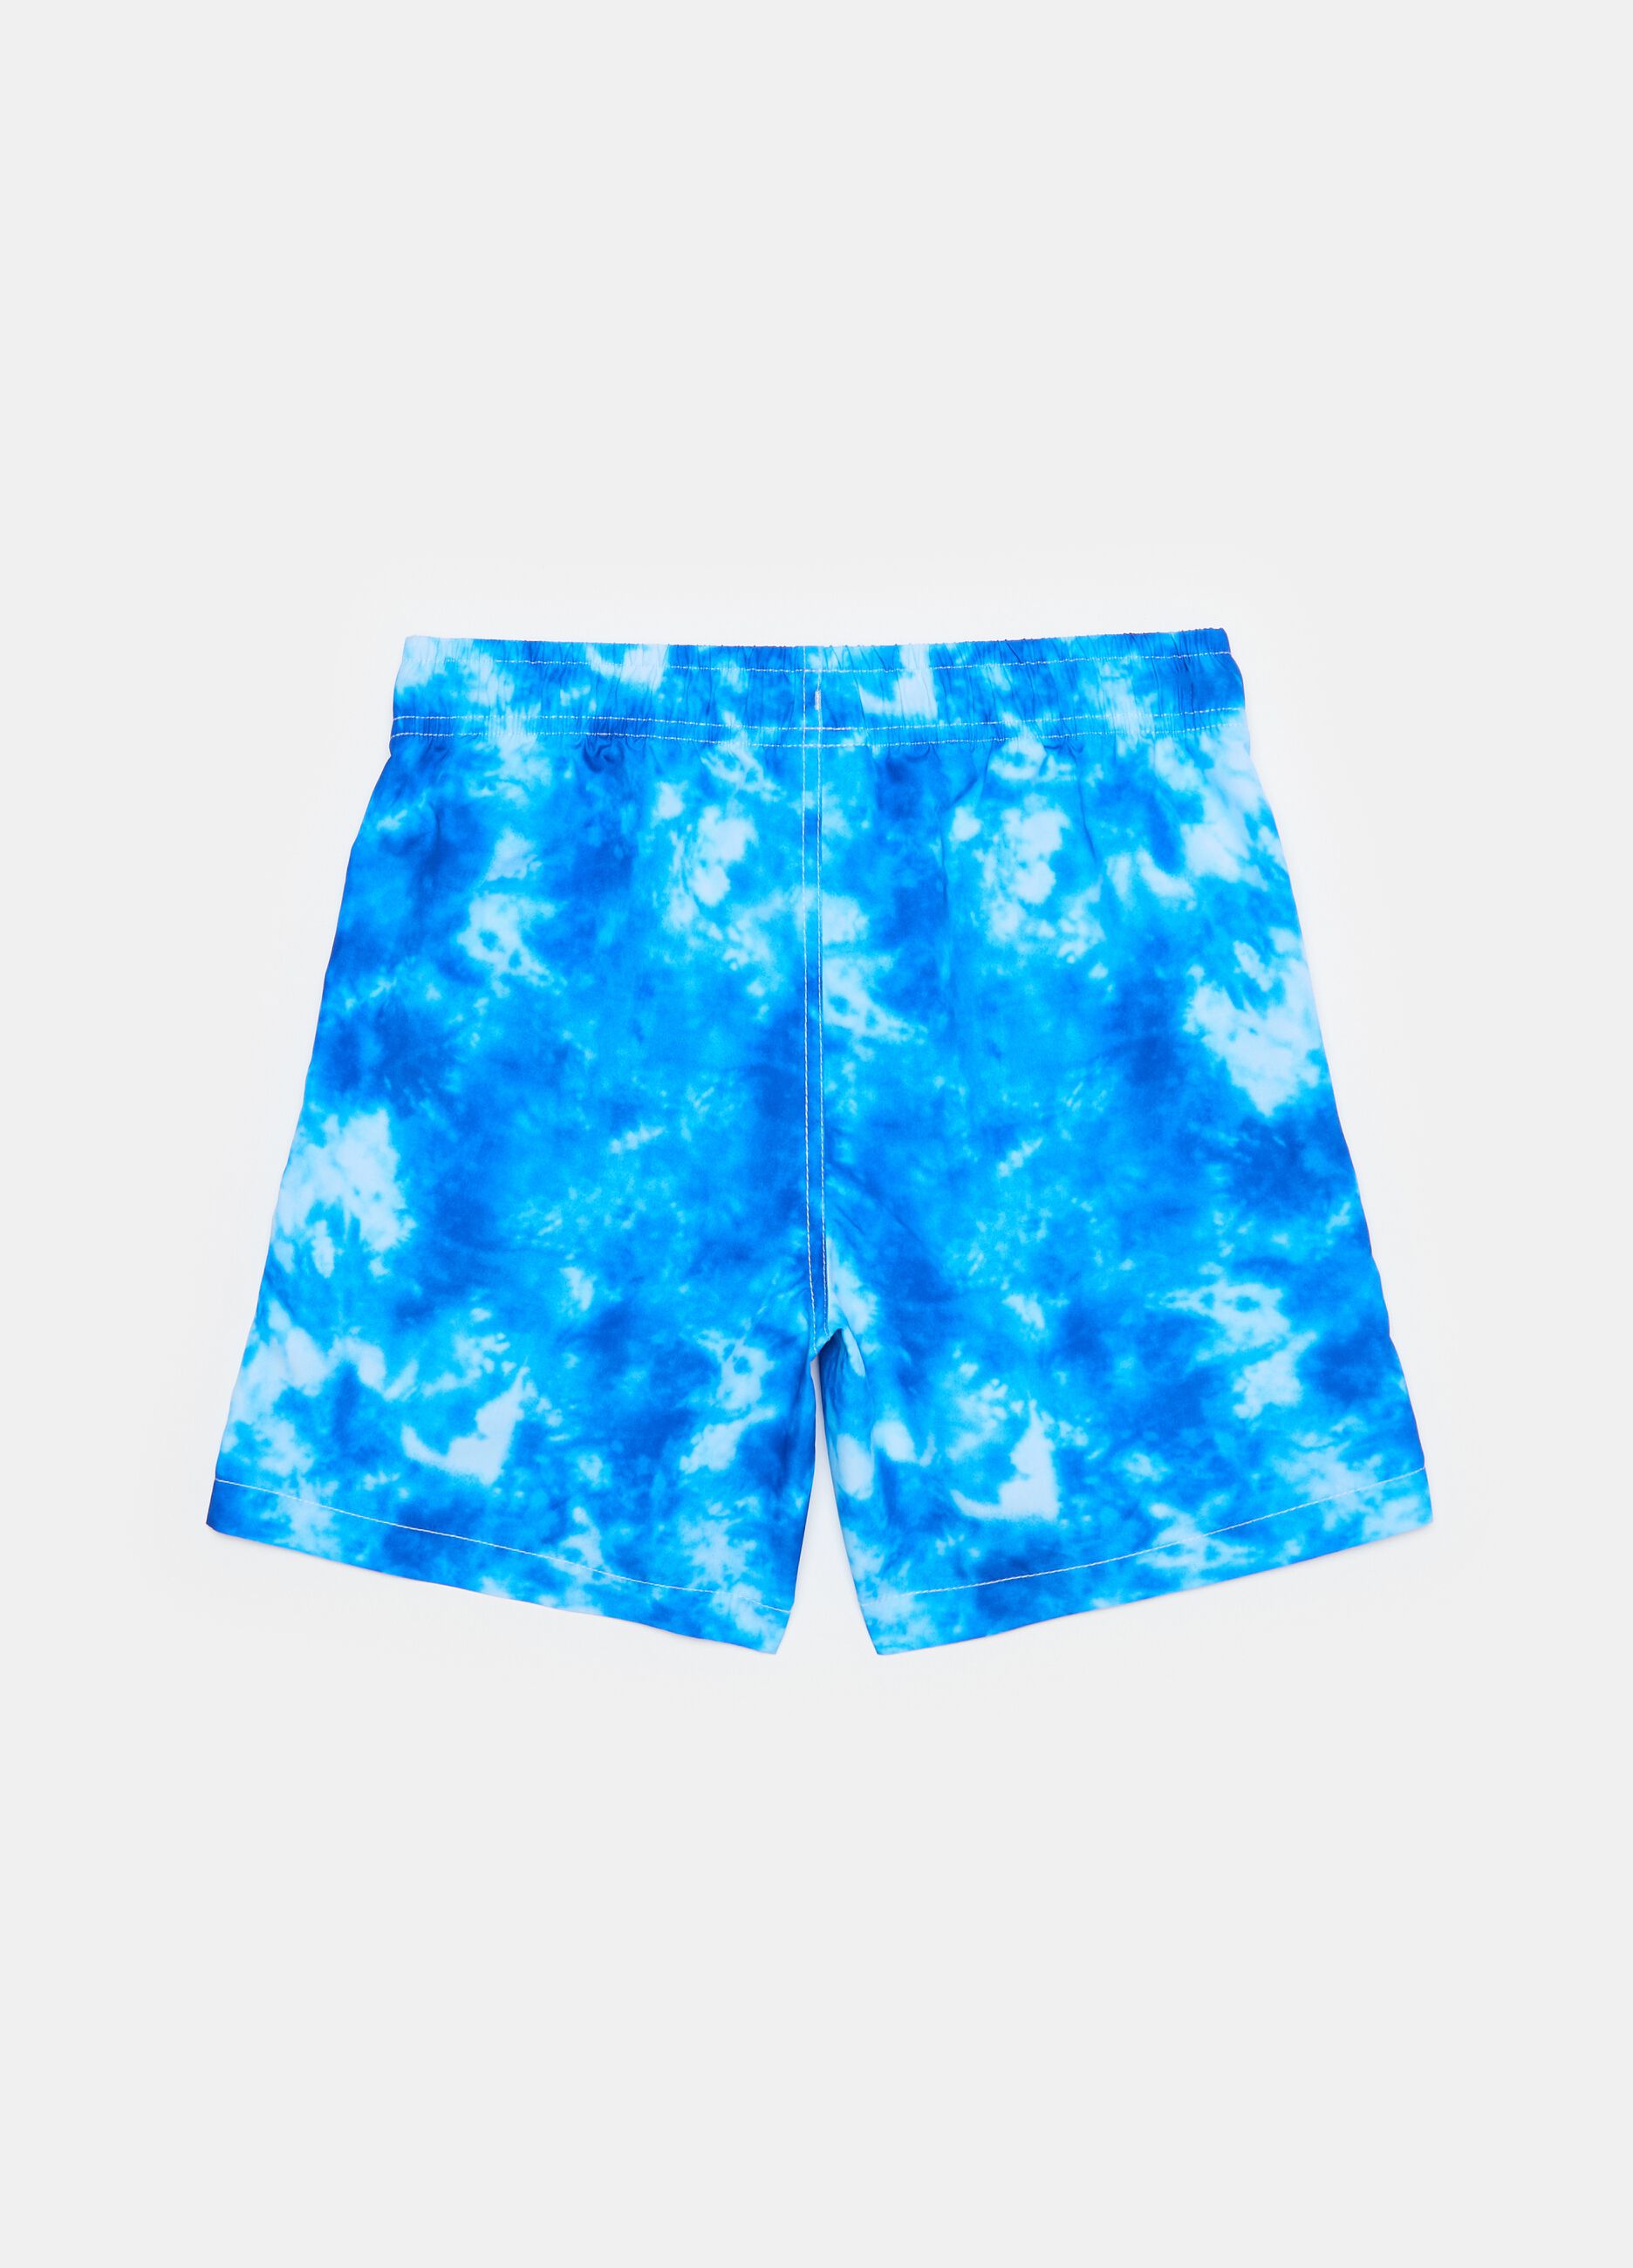 Swimming trunks with tie-dye pattern